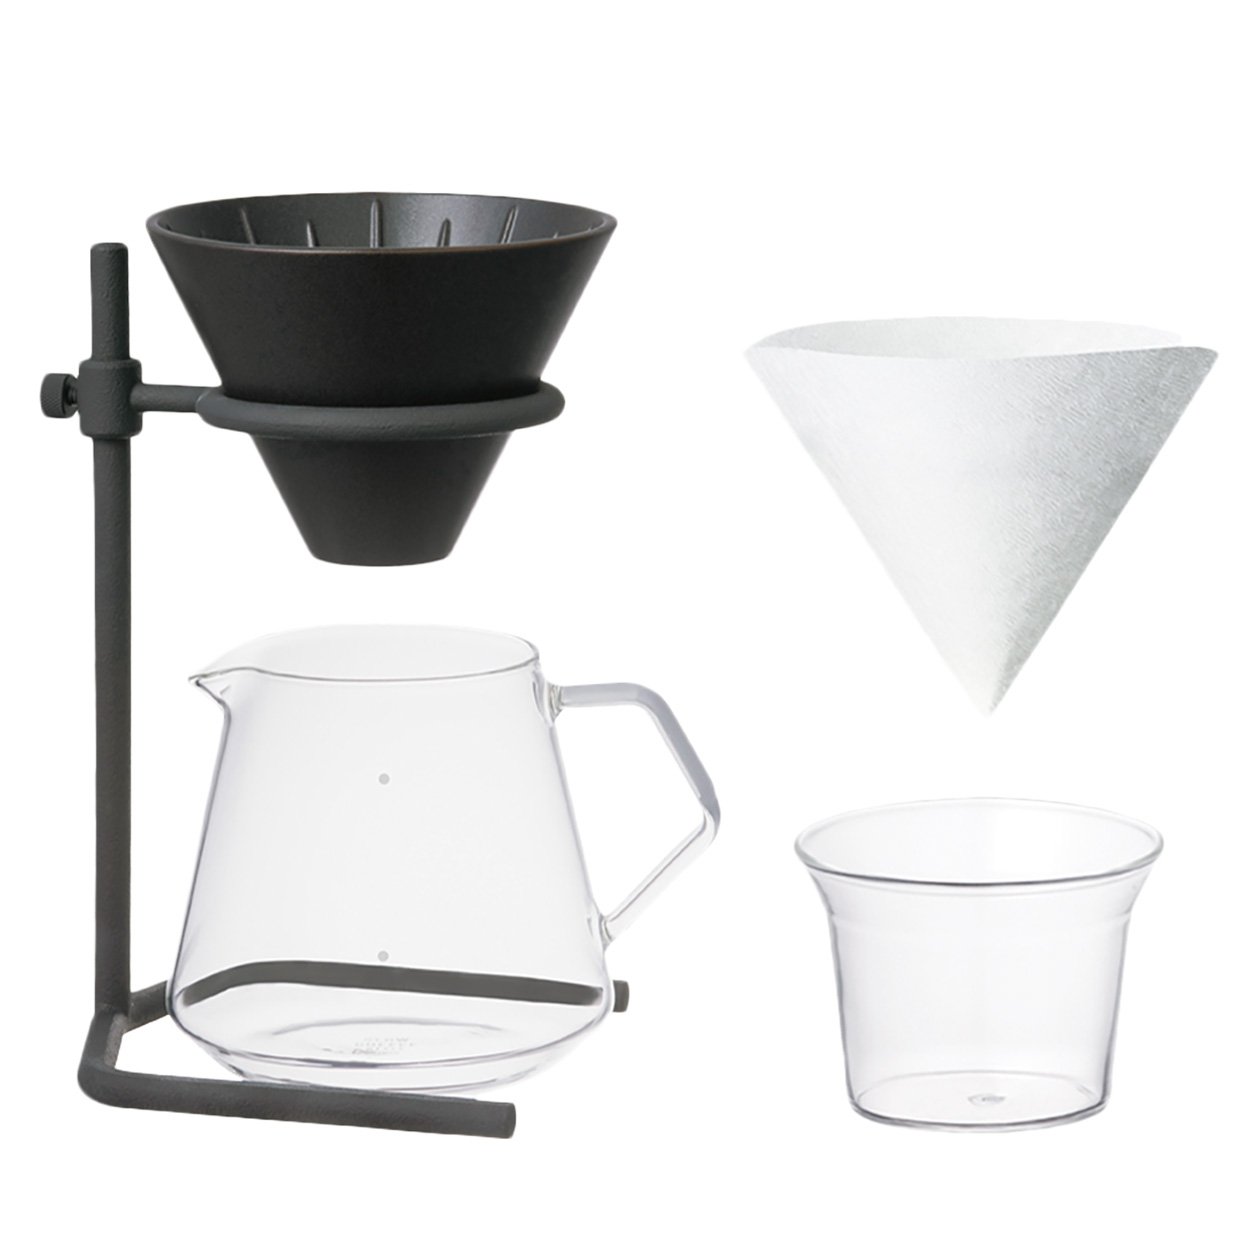 kinto-products-slow-coffee-style-specialty-S04-BrewerStandSet-4cups-2_1260x.jpg